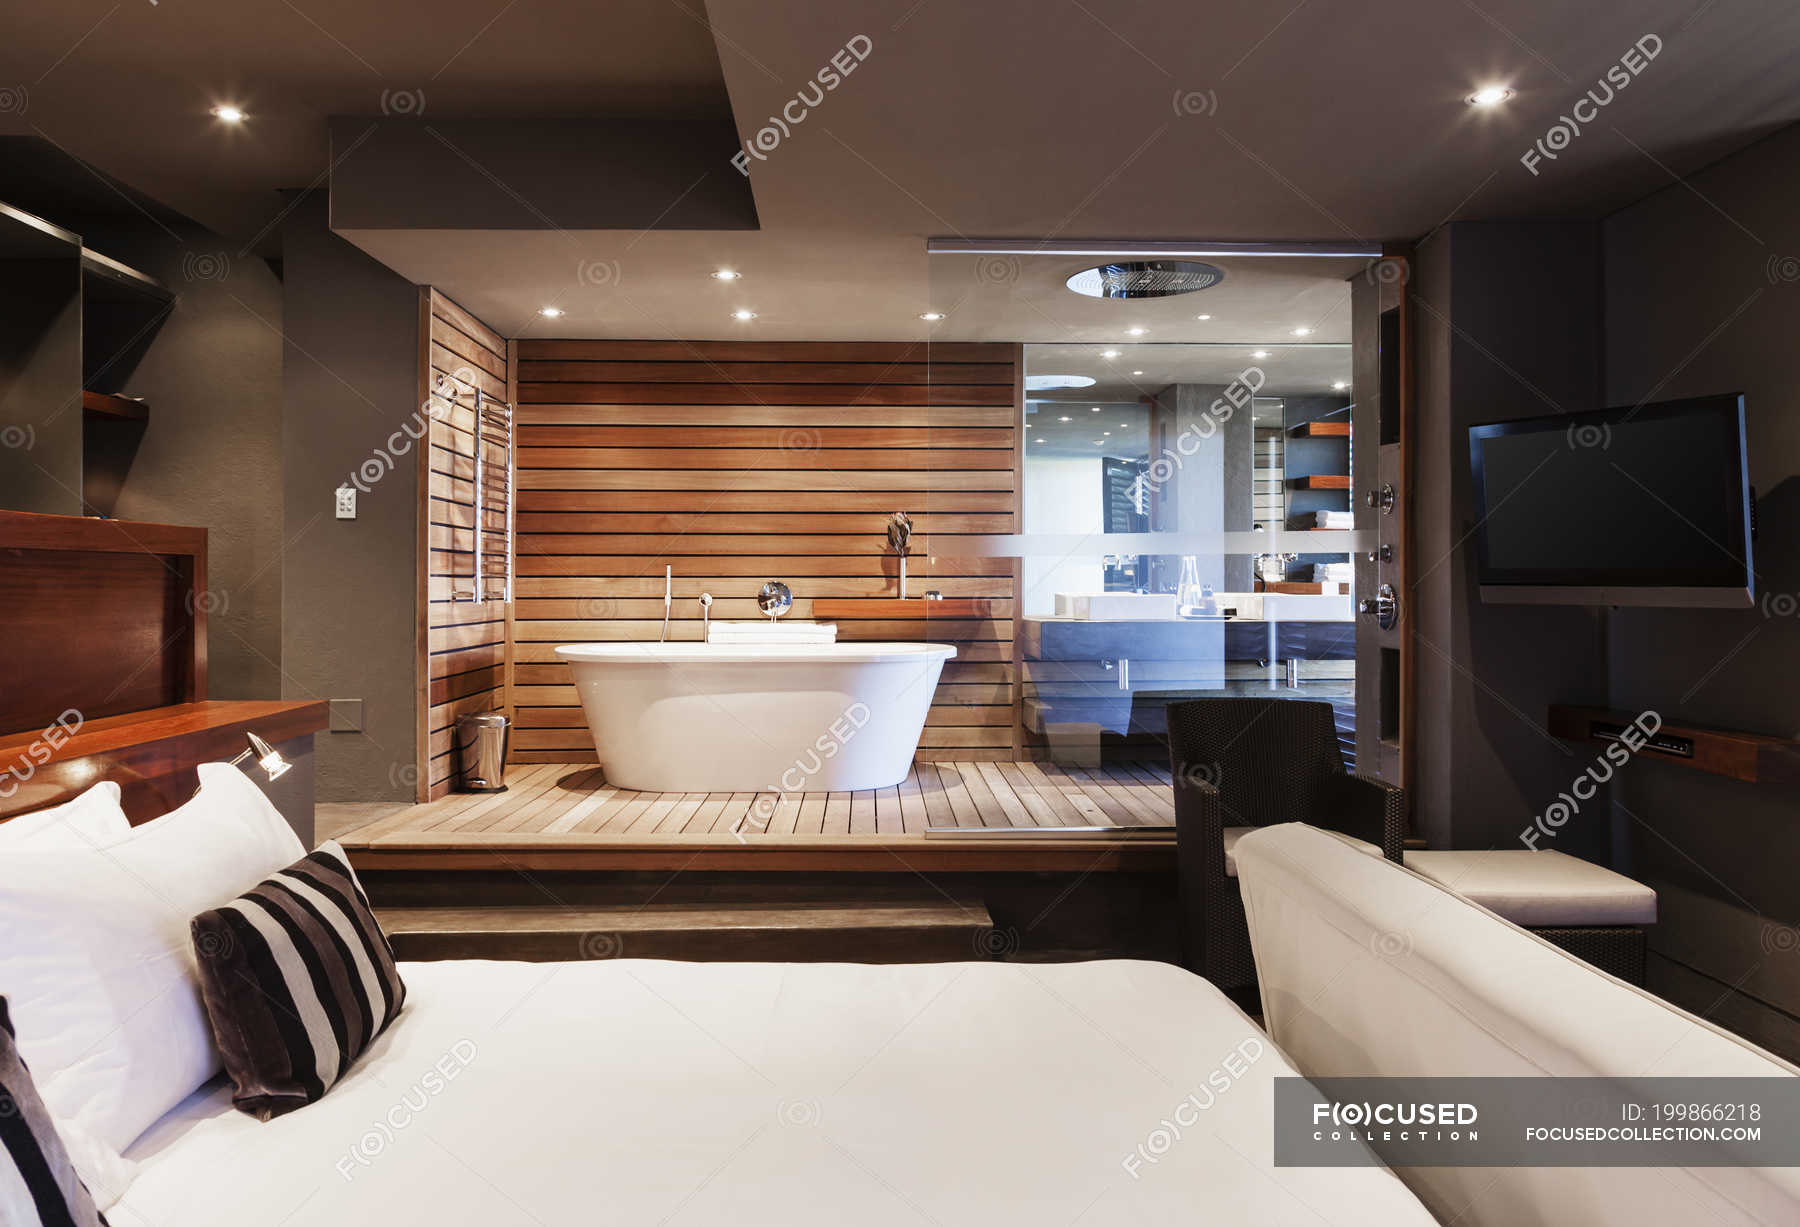 Bed And Bathtub In Modern Master Bedroom Property Residential Stock Photo 199866218